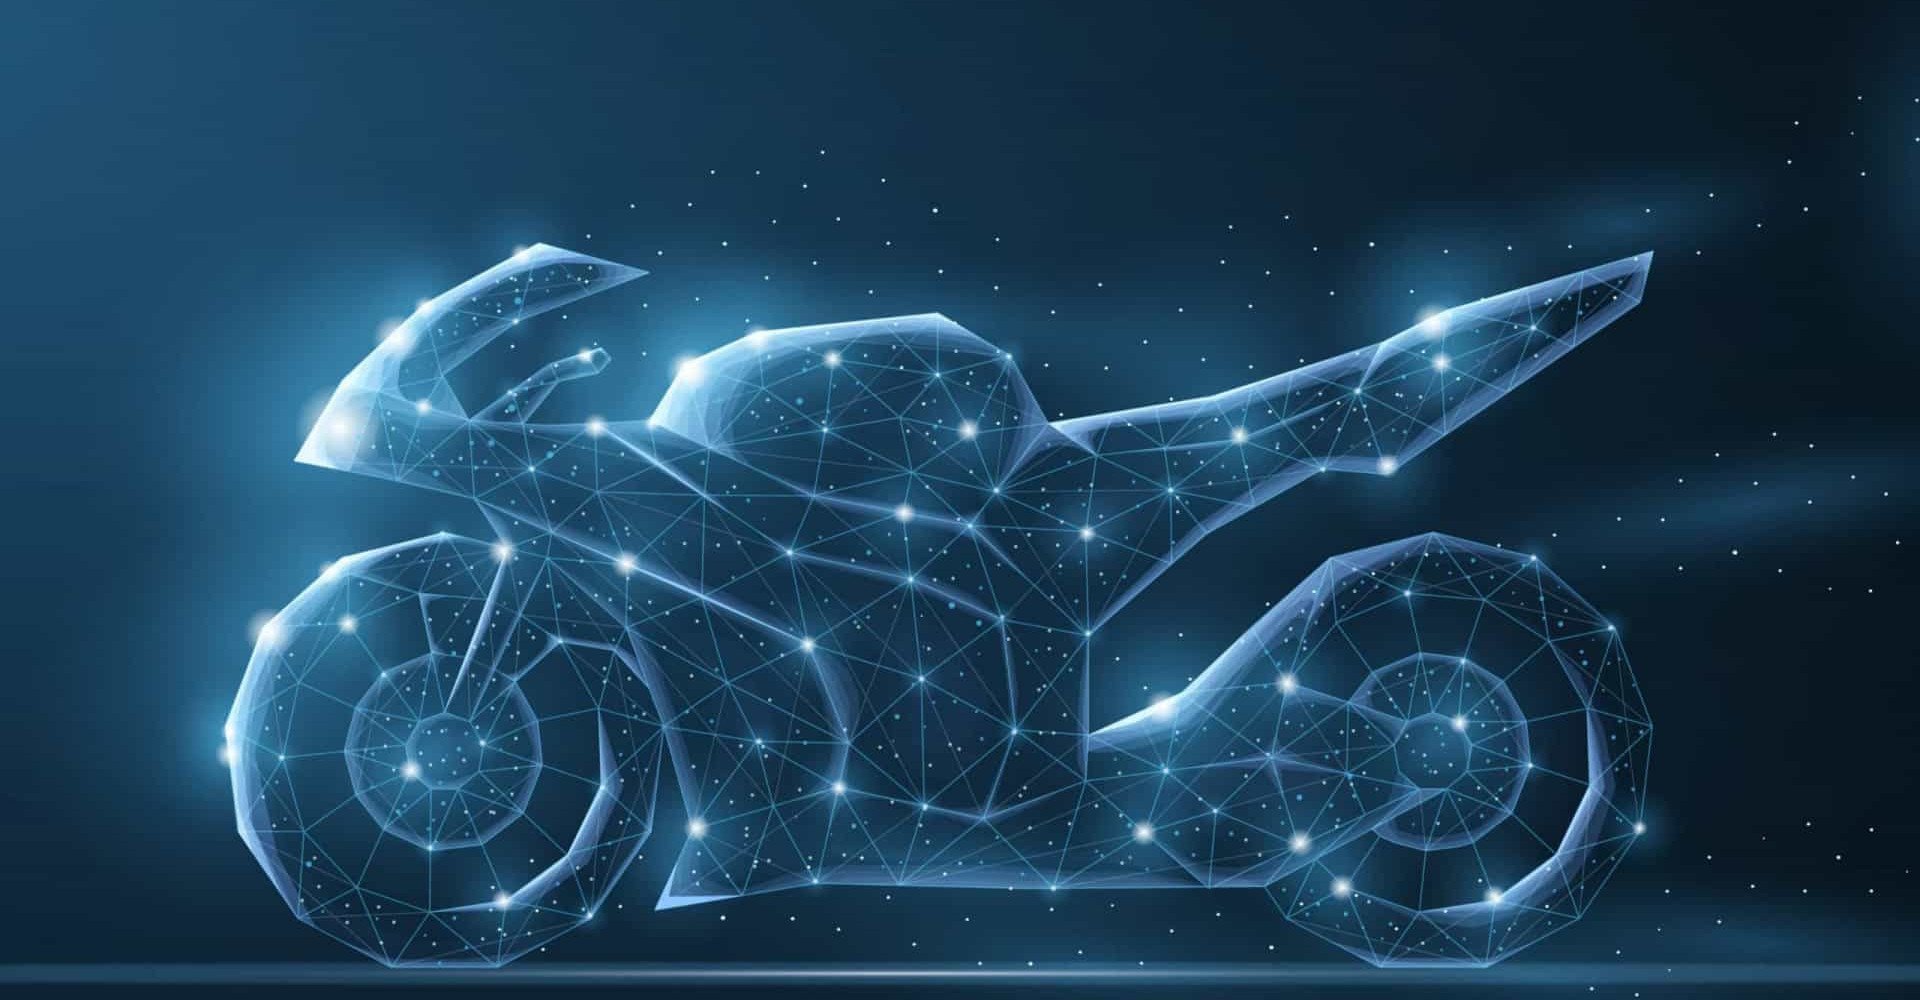 Motorcycle design featuring zodiac star constellation, a celestial ride under the stars